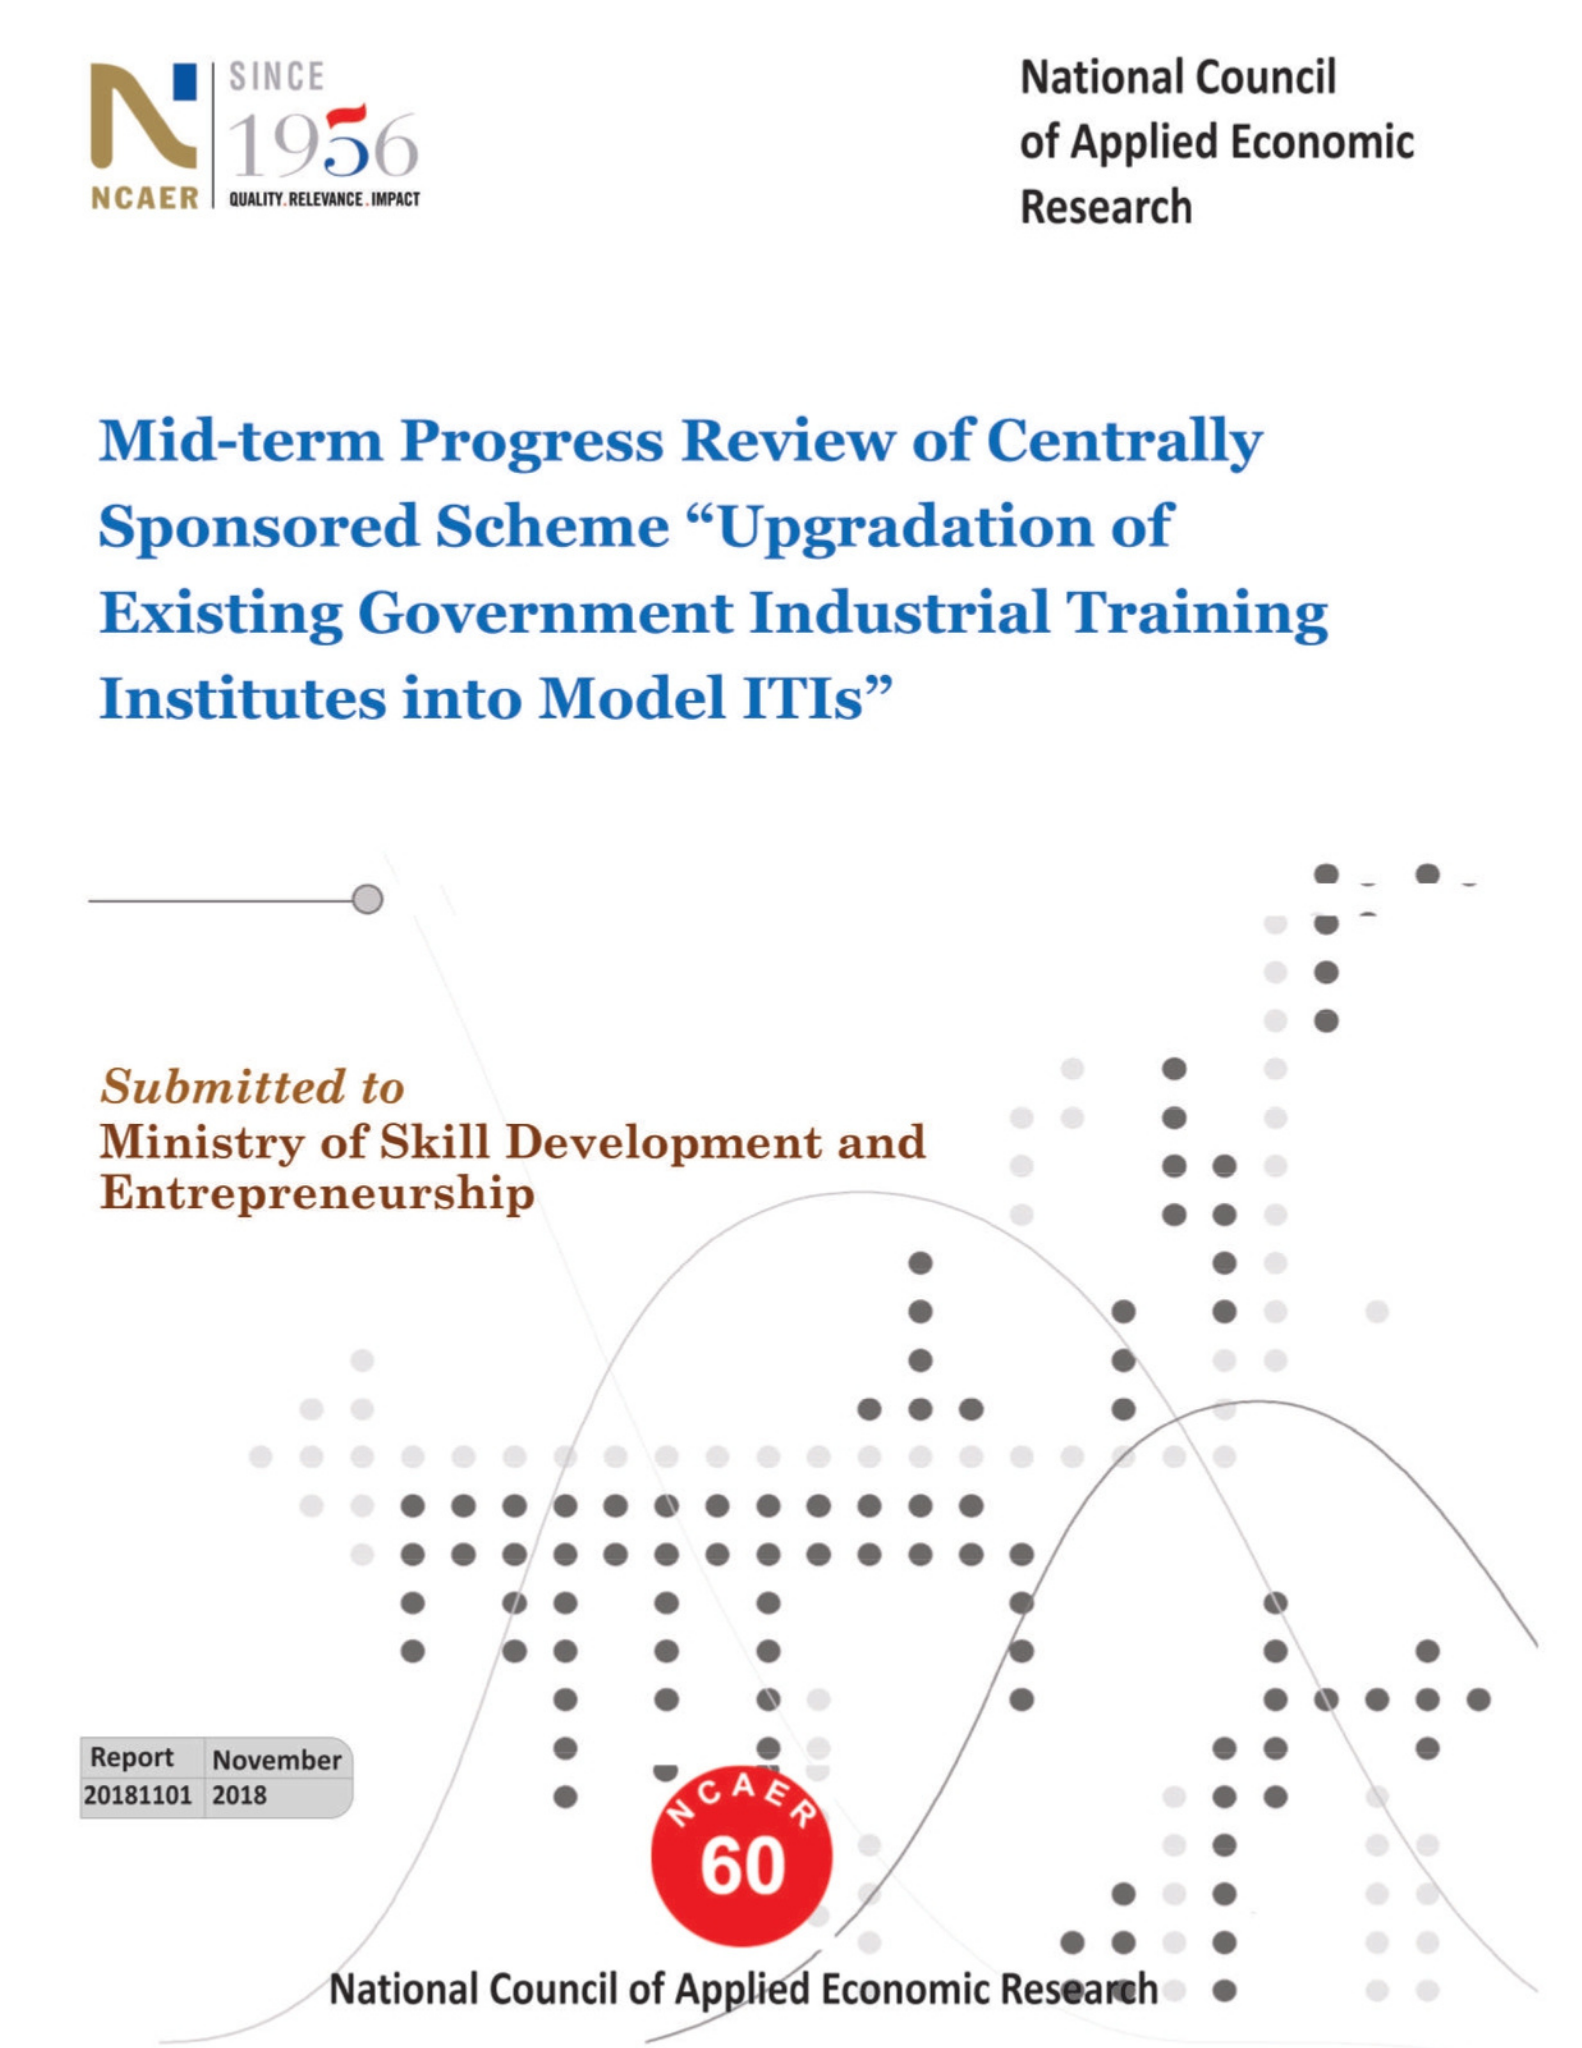 18570Mid-term Progress Review of Centrally Sponsored Scheme “Upgradation of Existing Government Industrial Training Institutes into Model ITIs”